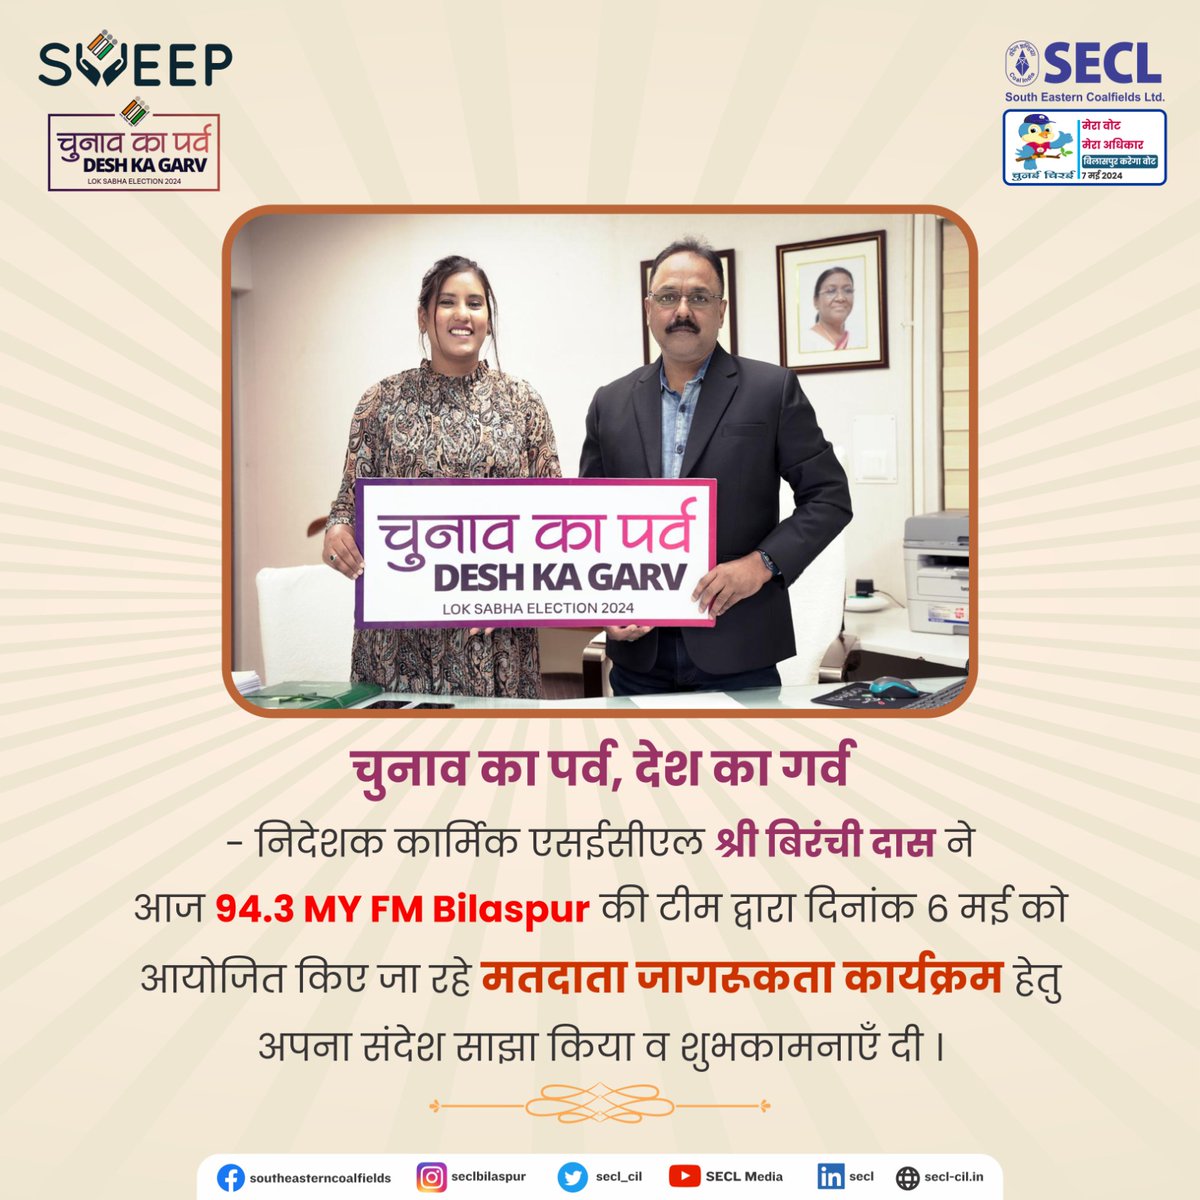 #ChunavKaParvDeshKaGarv - Director Personnel SECL Sh. Biranchi Das today shared his message and conveyed his best wishes for the #voterawareness program being organized by 94.3 MY FM team in Bilaspur on May 6. @CoalMinistry @CoalIndiaHQ @ECISVEEP @CEOChhattisgarh @BilaspurDist